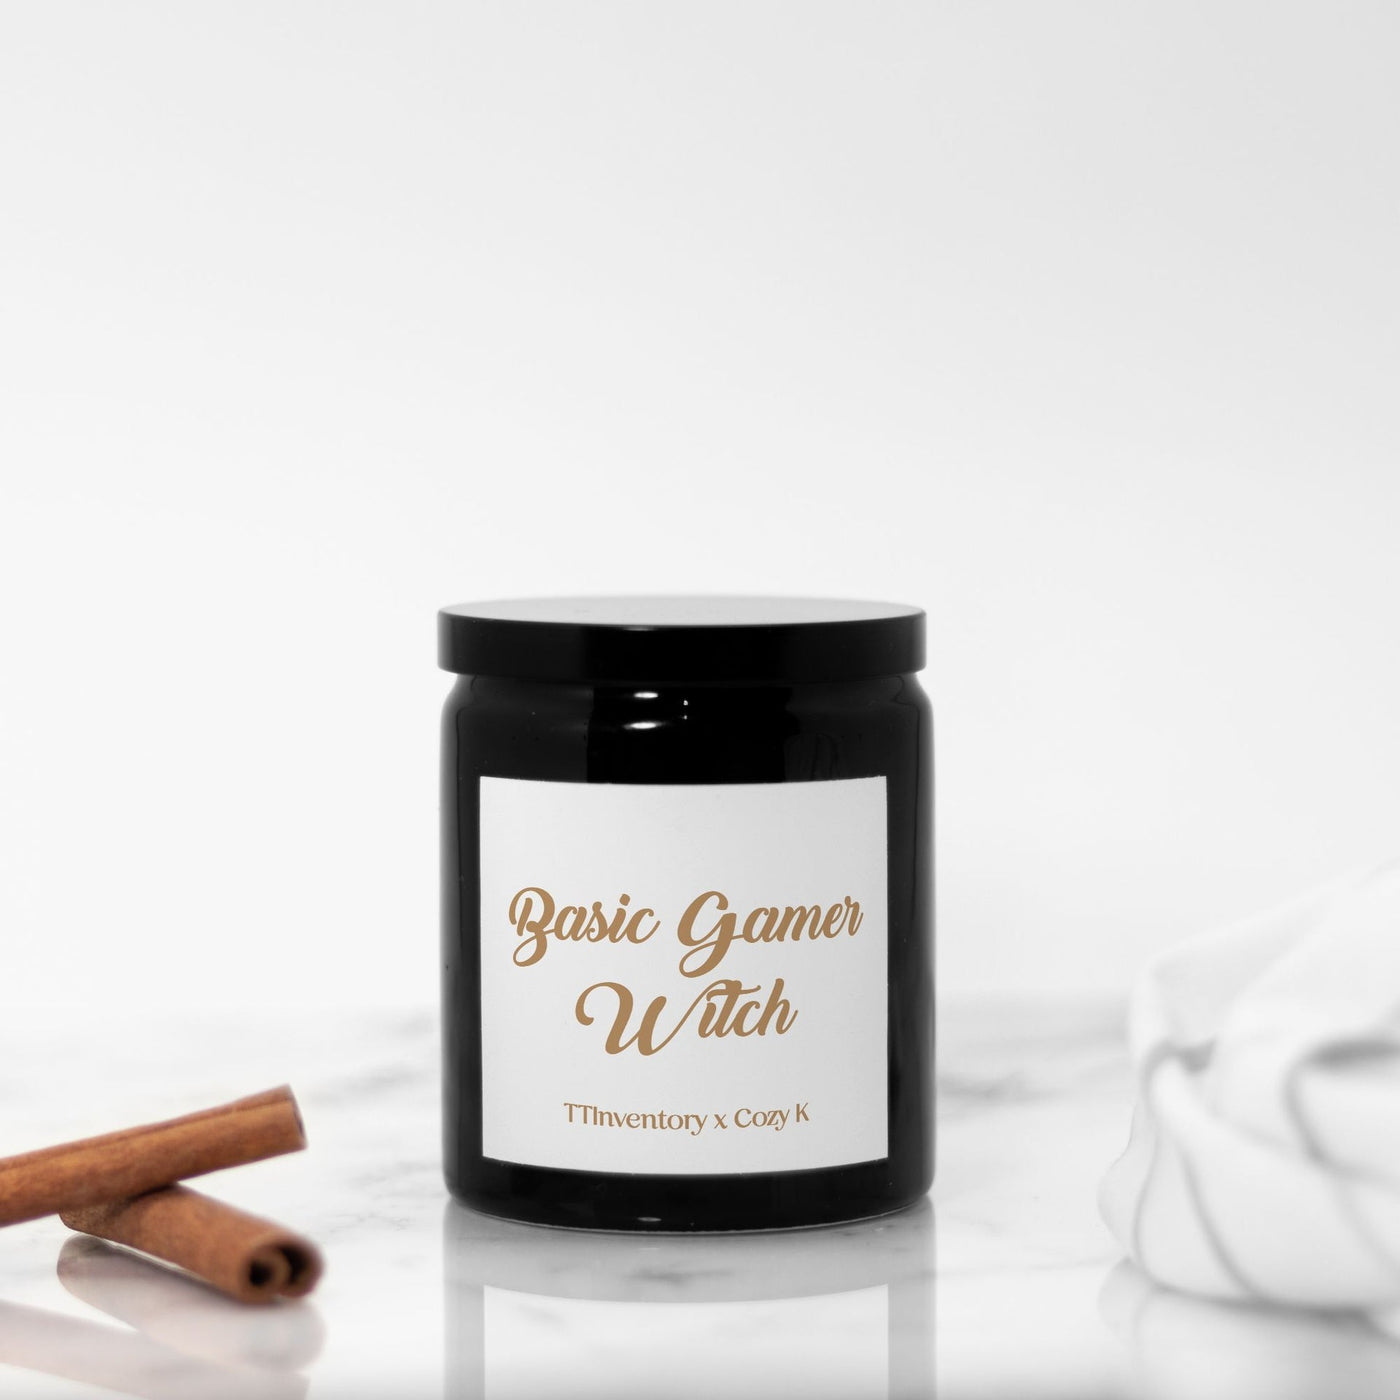 Basic Gamer Witch | 8oz Ceramic Candle | Fall Cozy Gaming Candles Threads & Thistles Inventory 